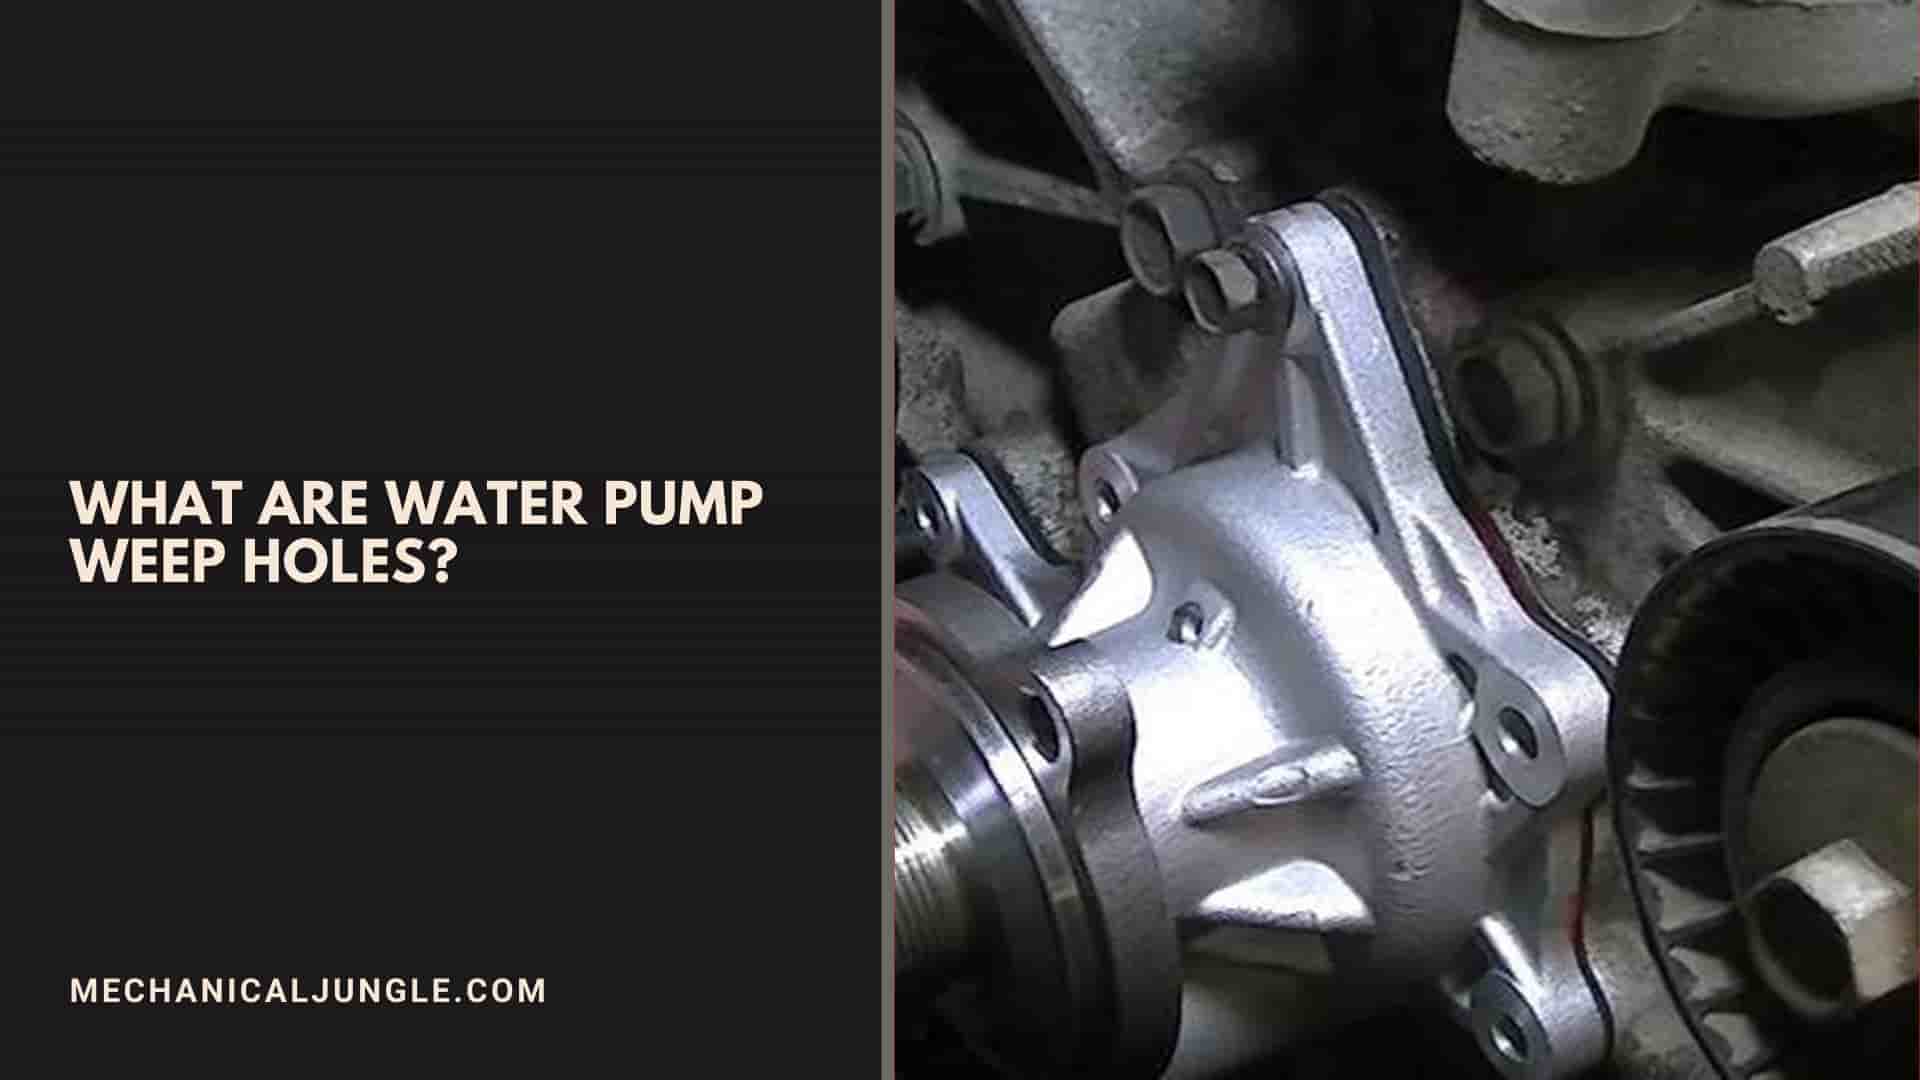 What Are Water Pump Weep Holes?